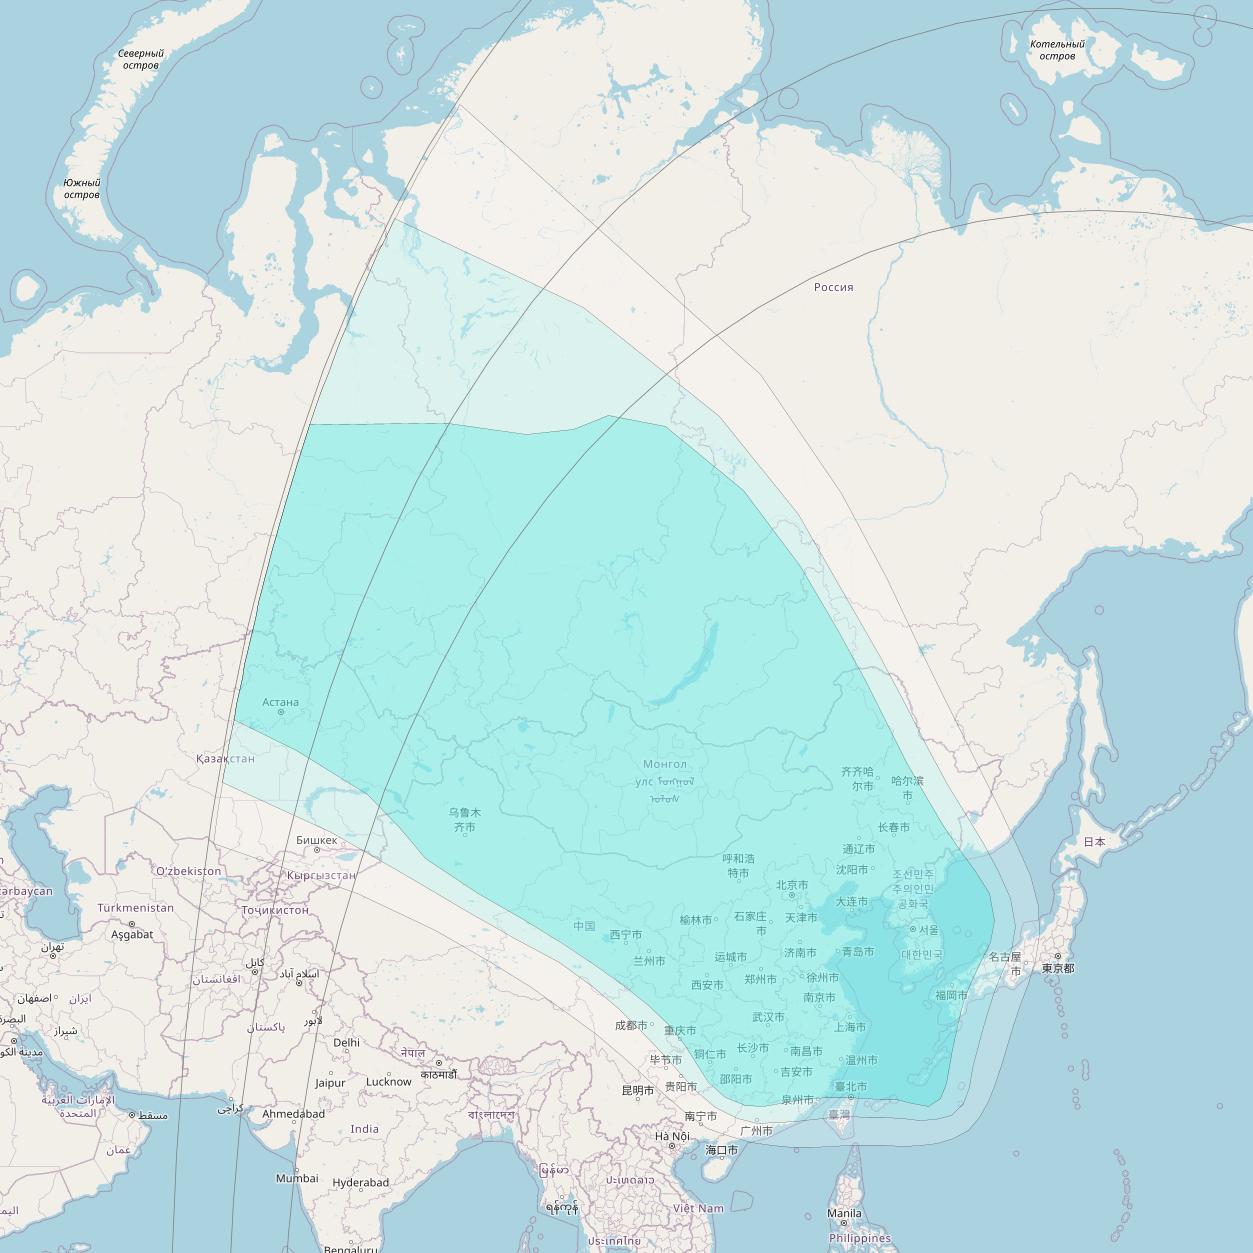 Inmarsat-4F1 at 143° E downlink L-band R016 Regional Spot beam coverage map